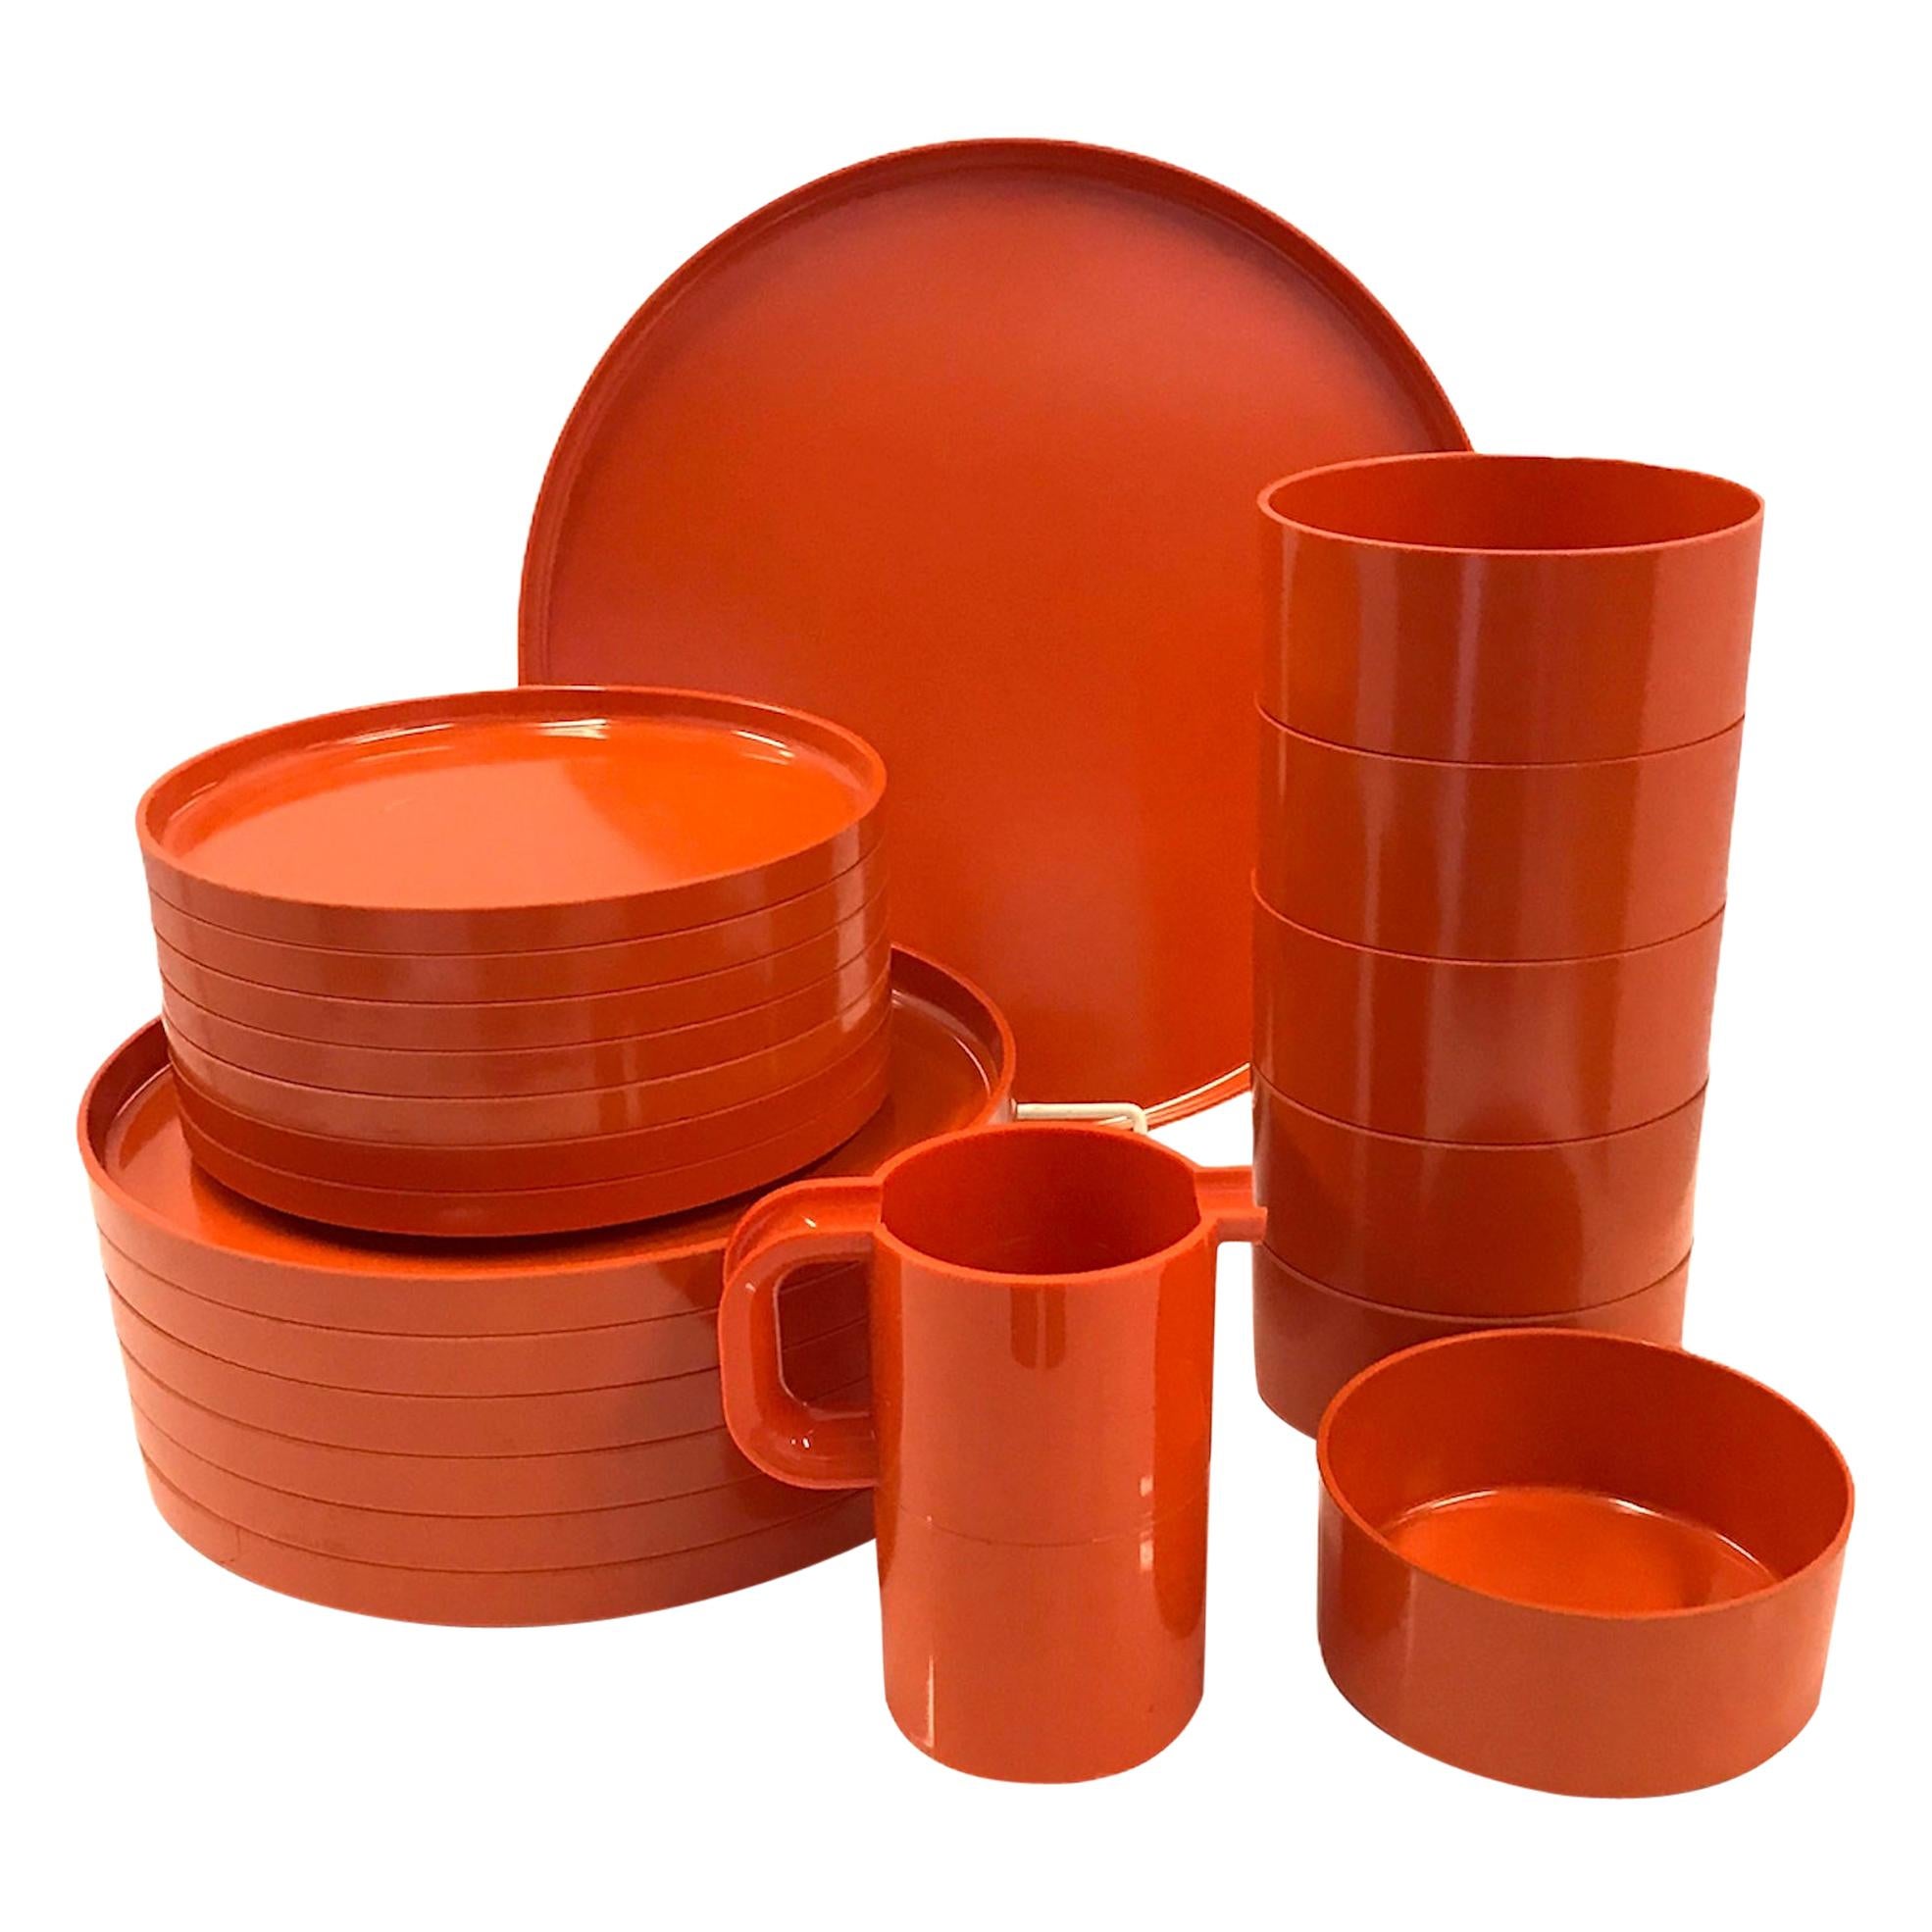 Massimo Vignelli for Heller Set of Max 2 ABS Dinnerware, Italy 1960s - 22 Pieces